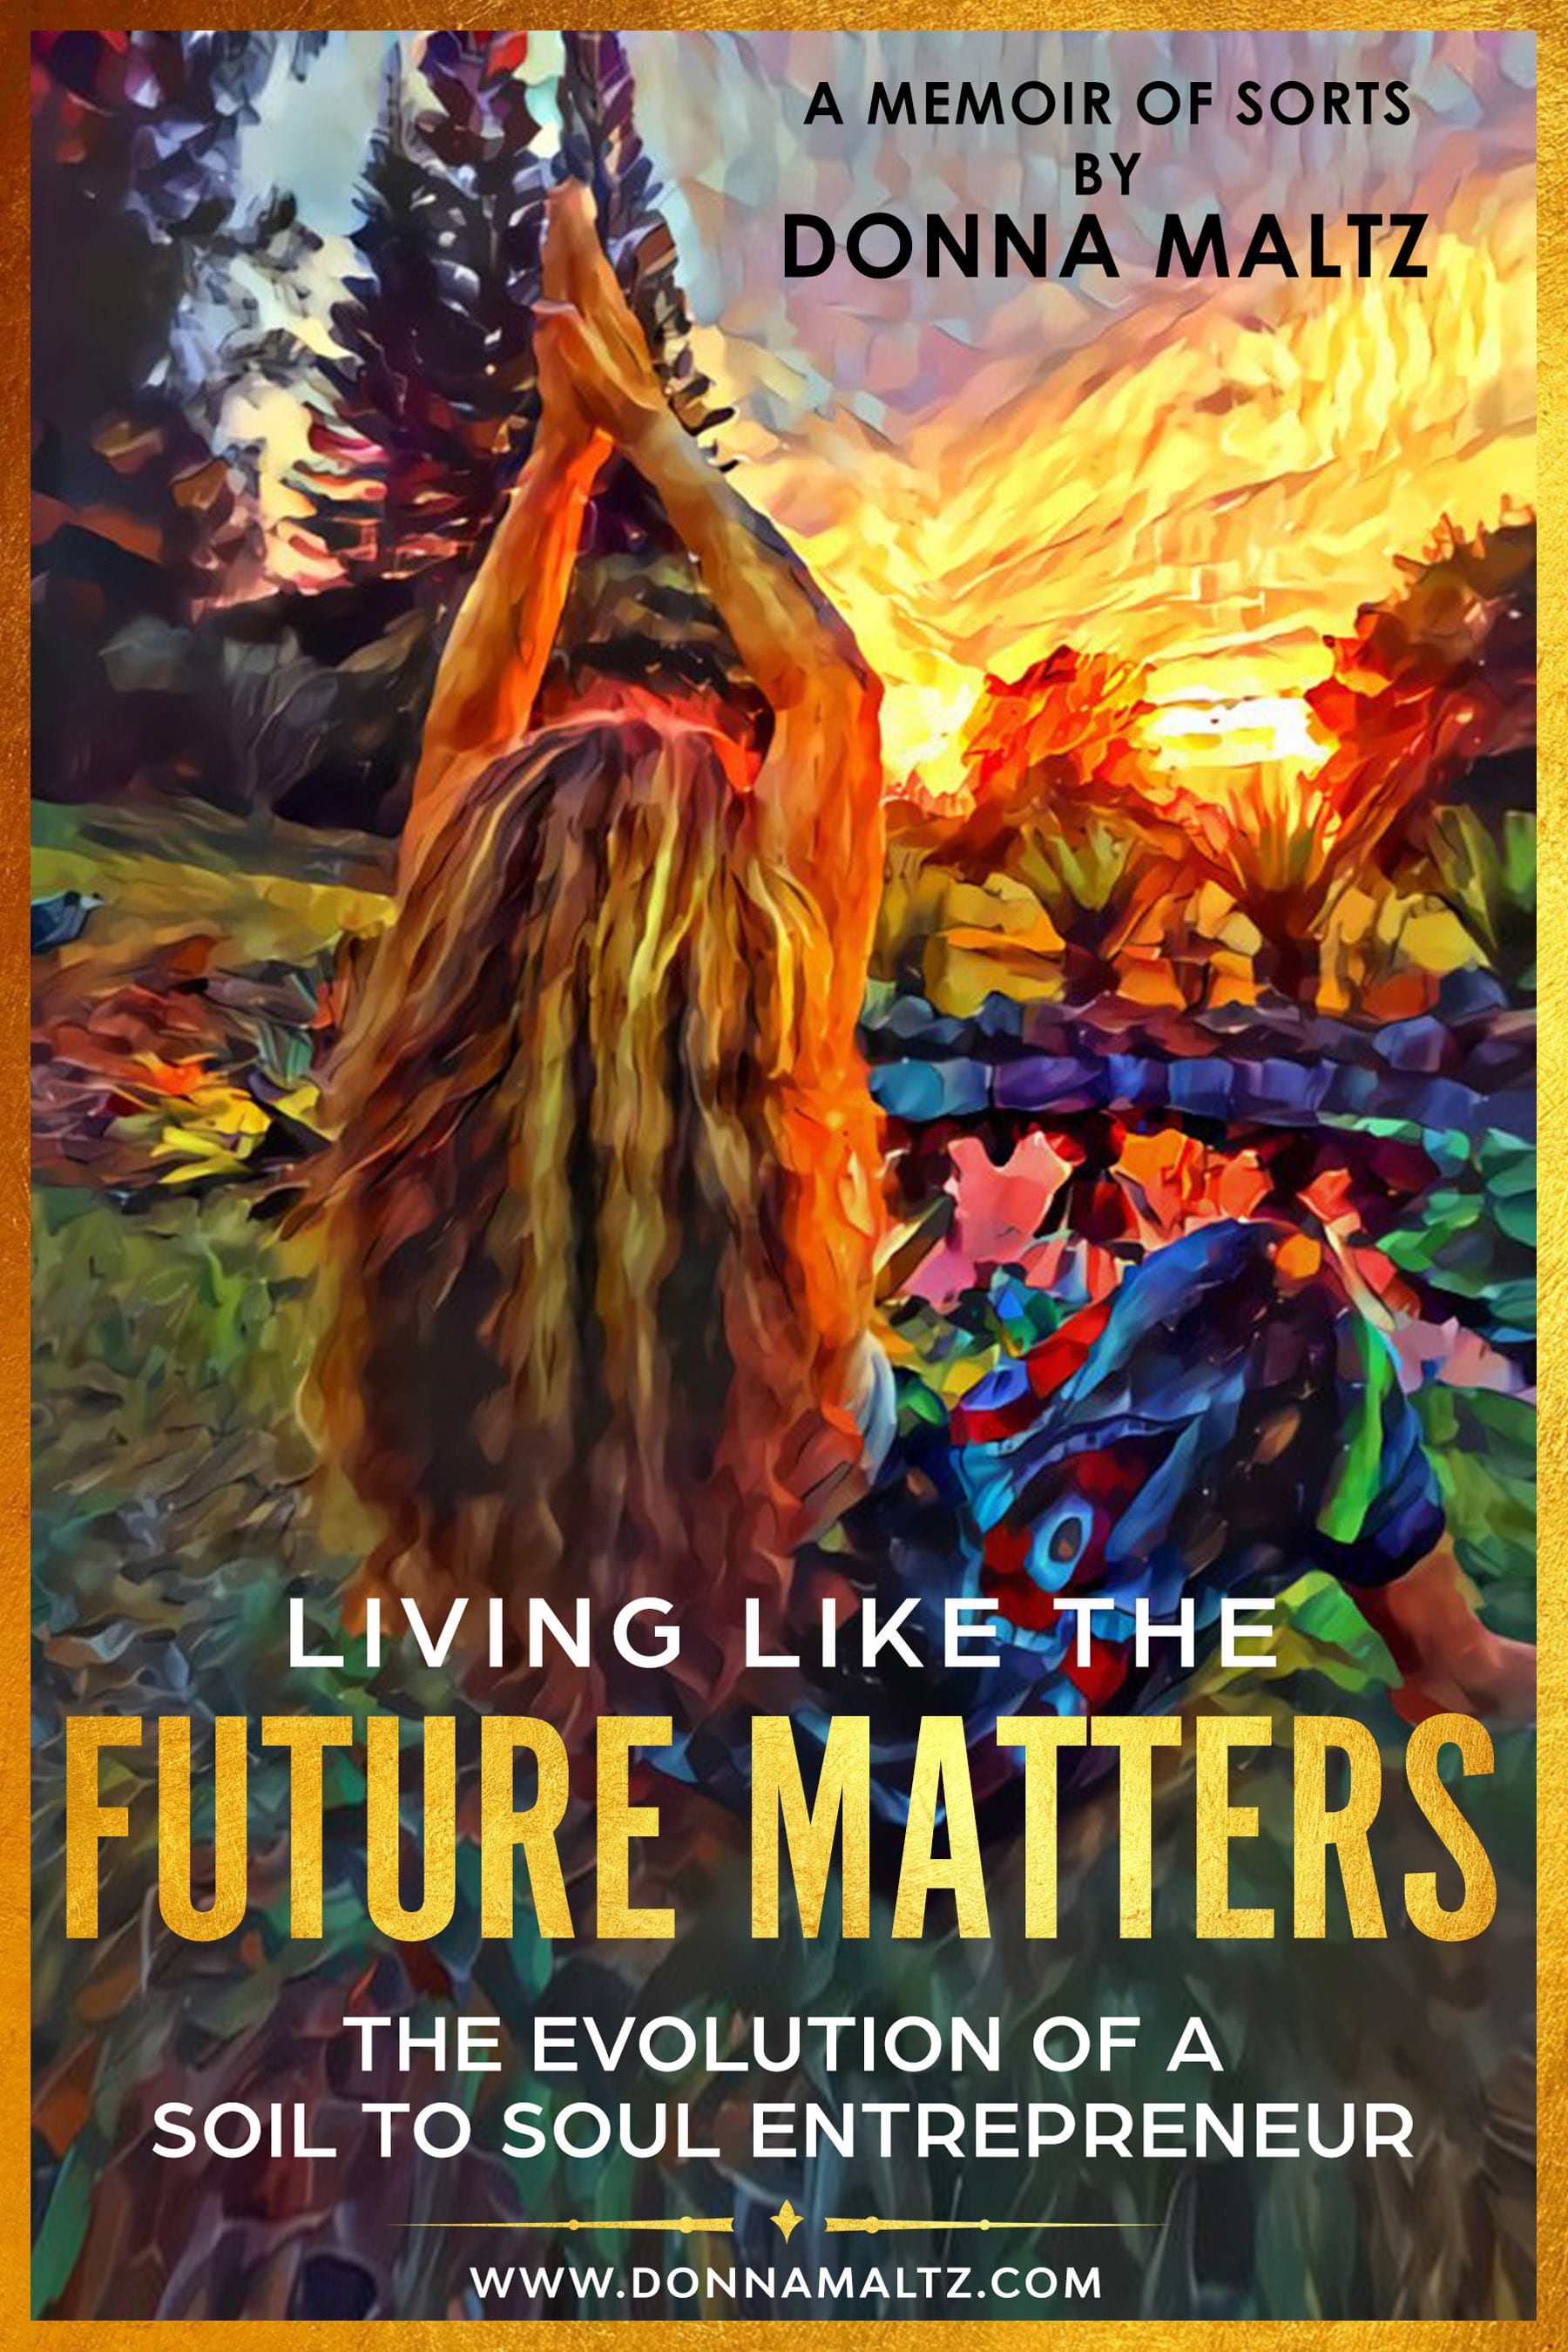 📚 Enjoy free chapters of Living Like the Future Matters ~ the Evolution of a Soil to Soul Entrepreneur thumbnail